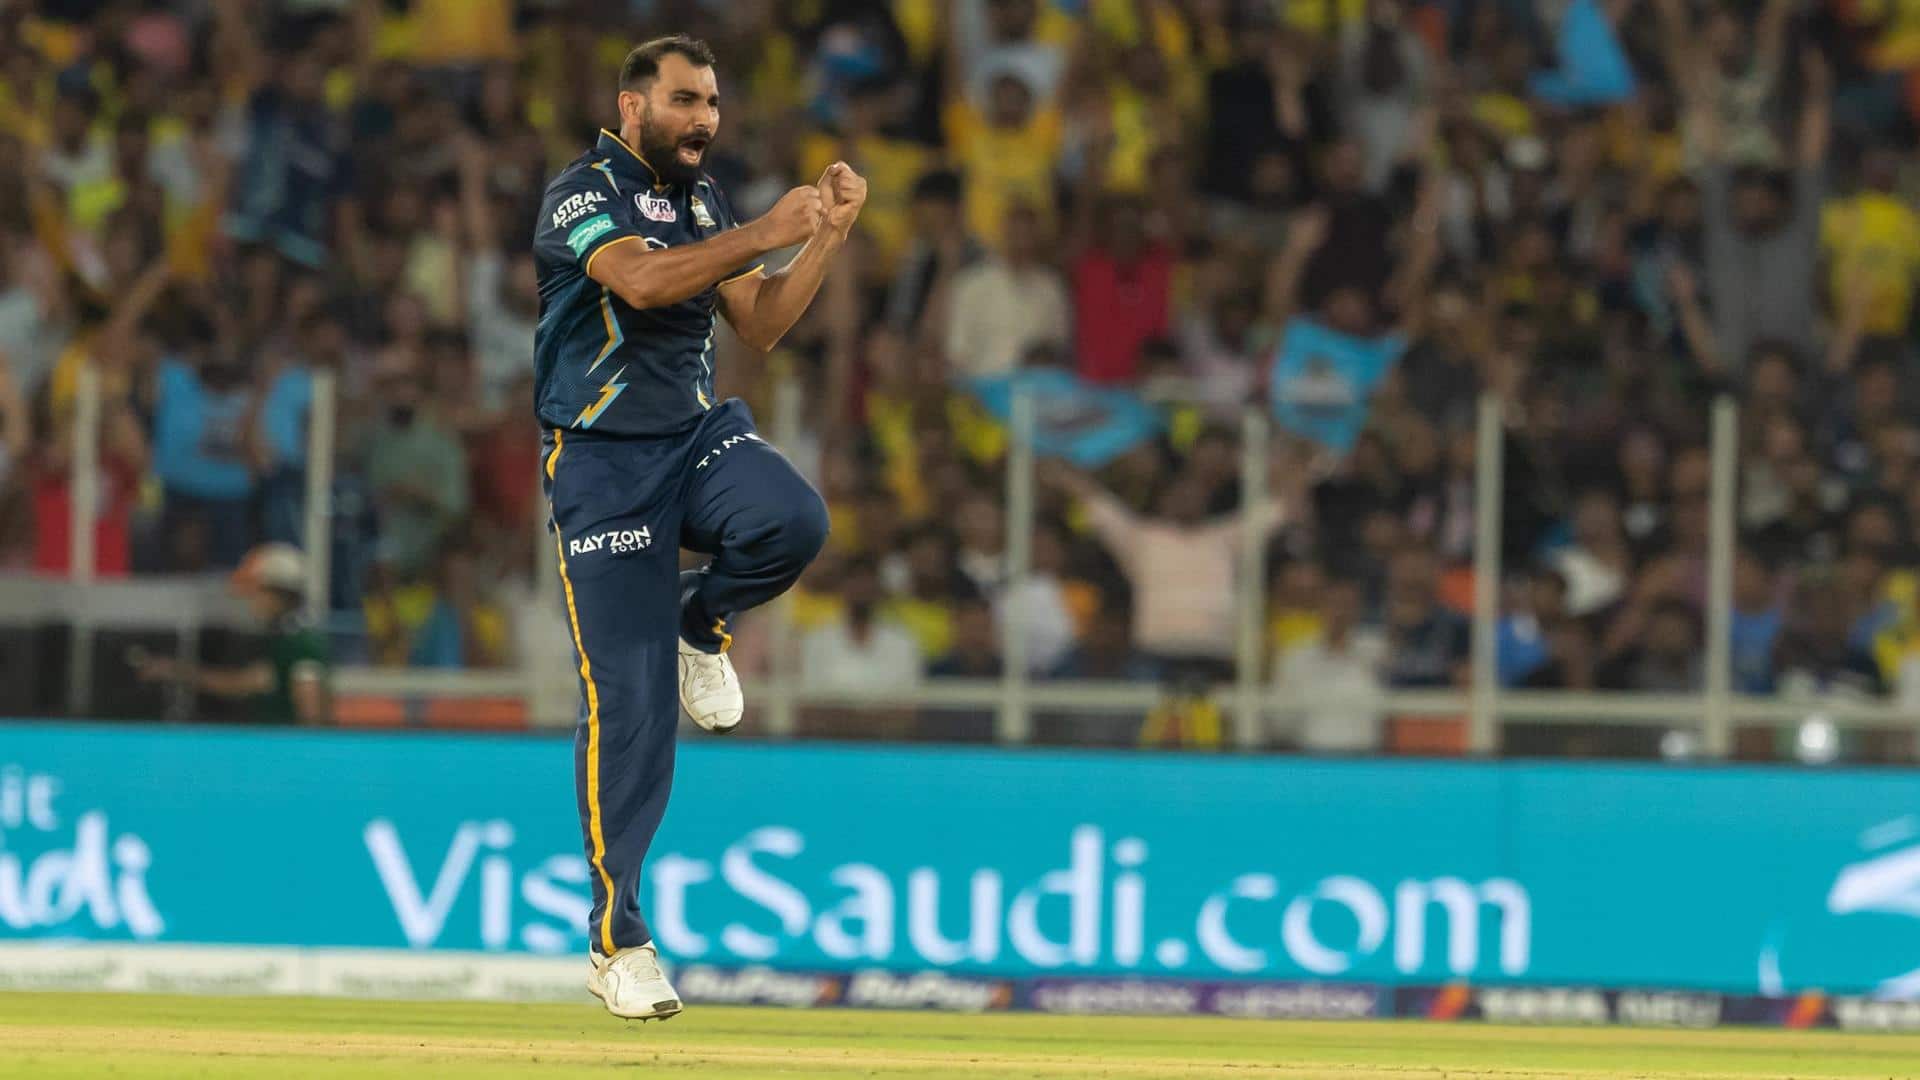 Mohammed Shami completes 100 wickets in IPL: Key stats